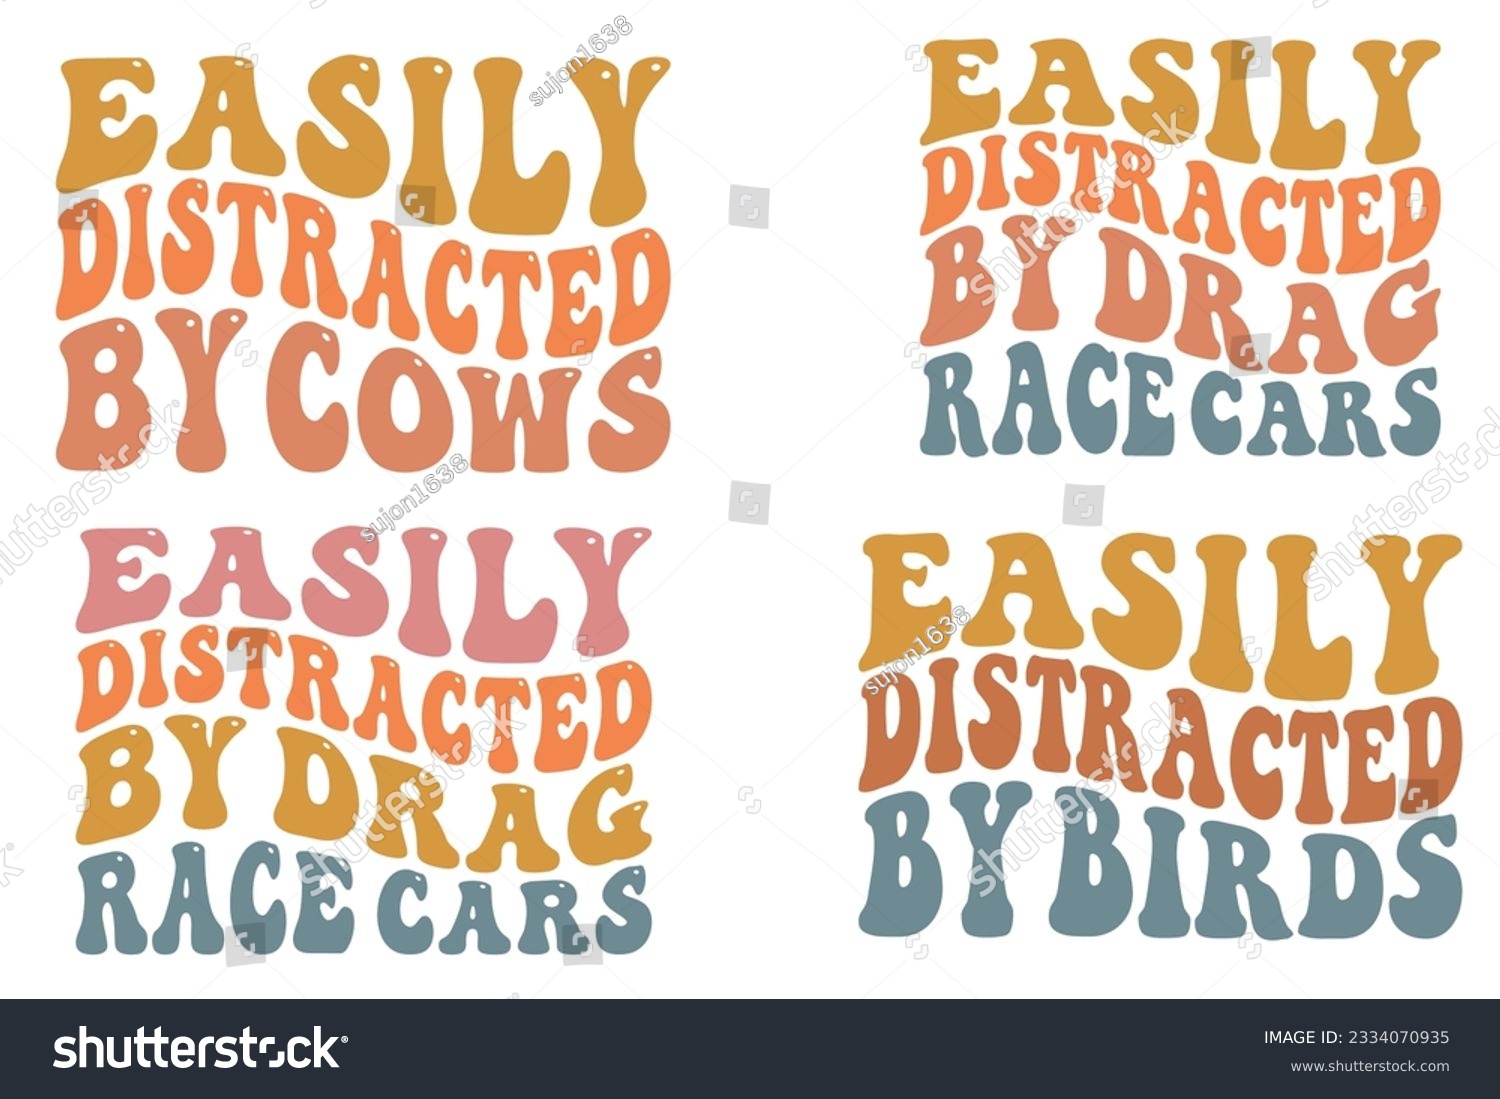 SVG of  Easily Distracted by cows, Easily Distracted by drag race cars, Easily Distracted by birds retro wavy SVG bundle T-shirt svg